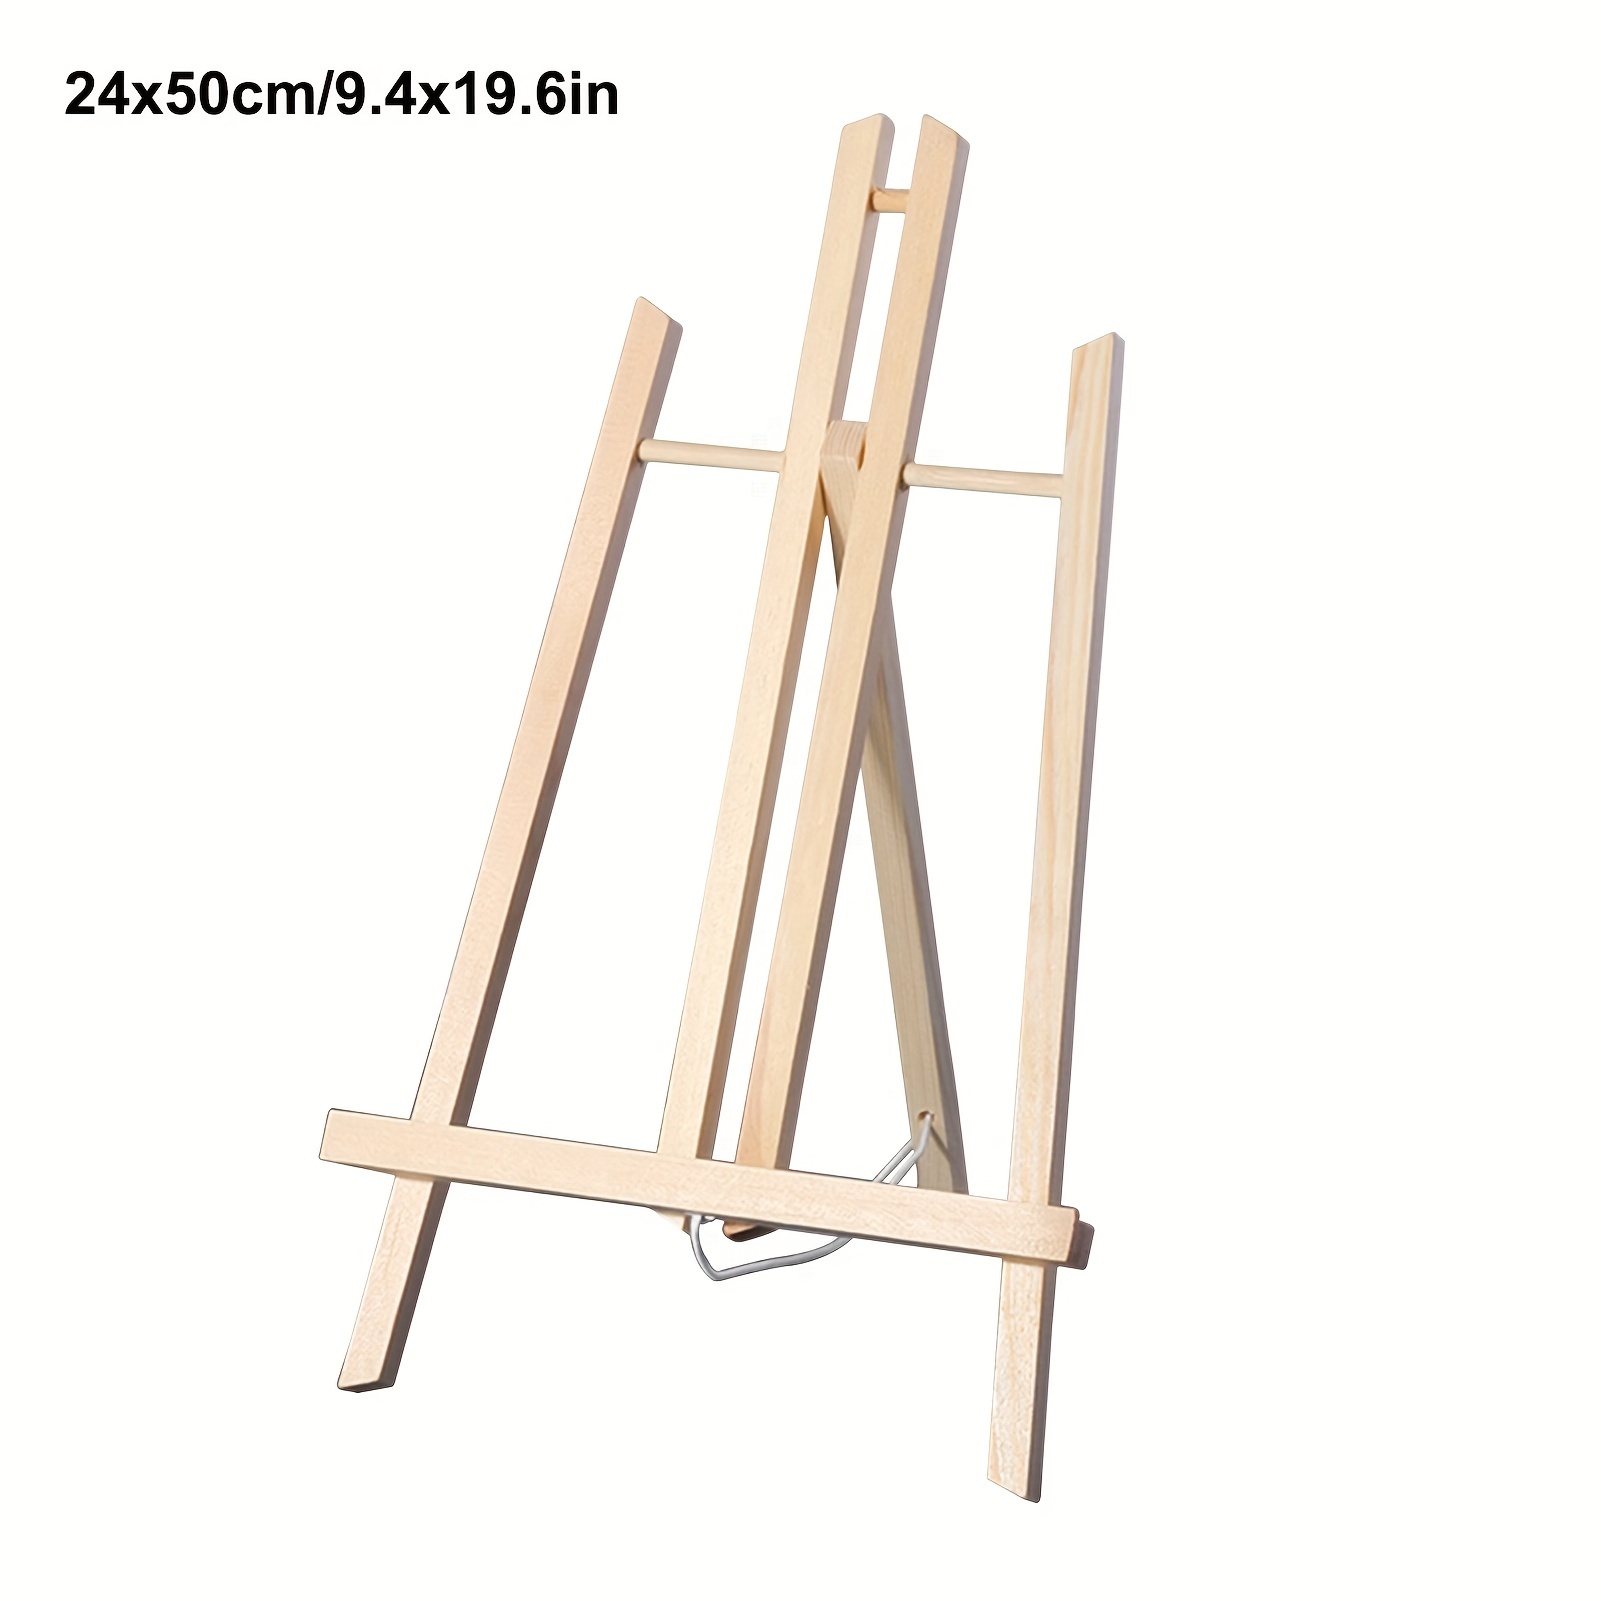 Wooden Mini Easel Stand Painting Canvas Craft Exhibit Display Holder